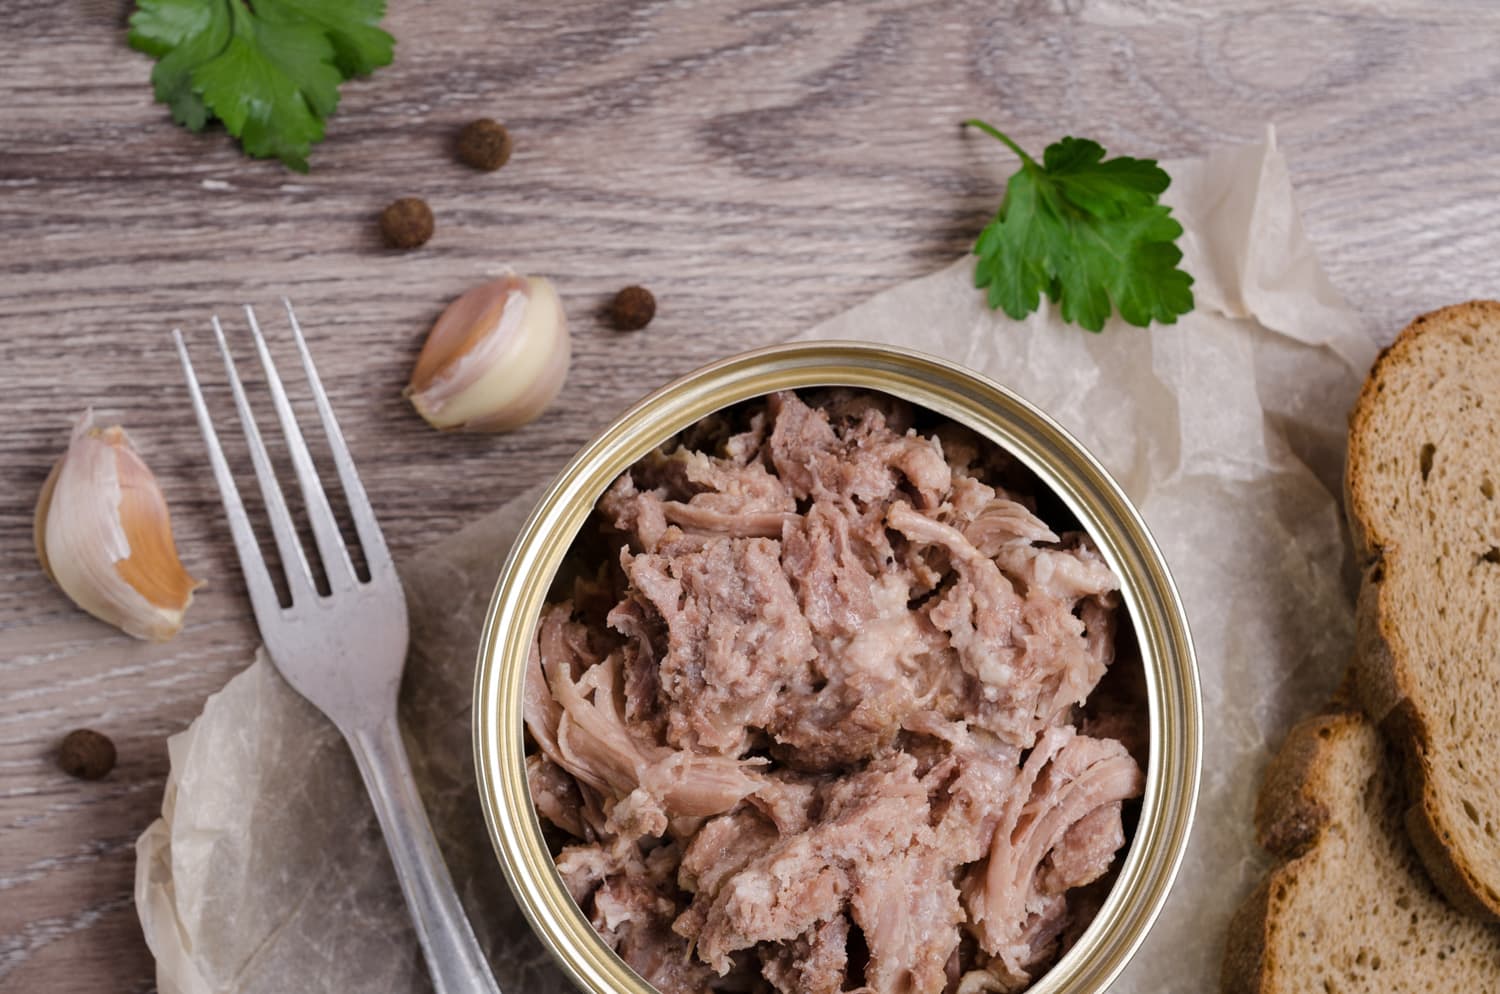 Canned meat fillet in a metal can on a wooden background. Selective focus.